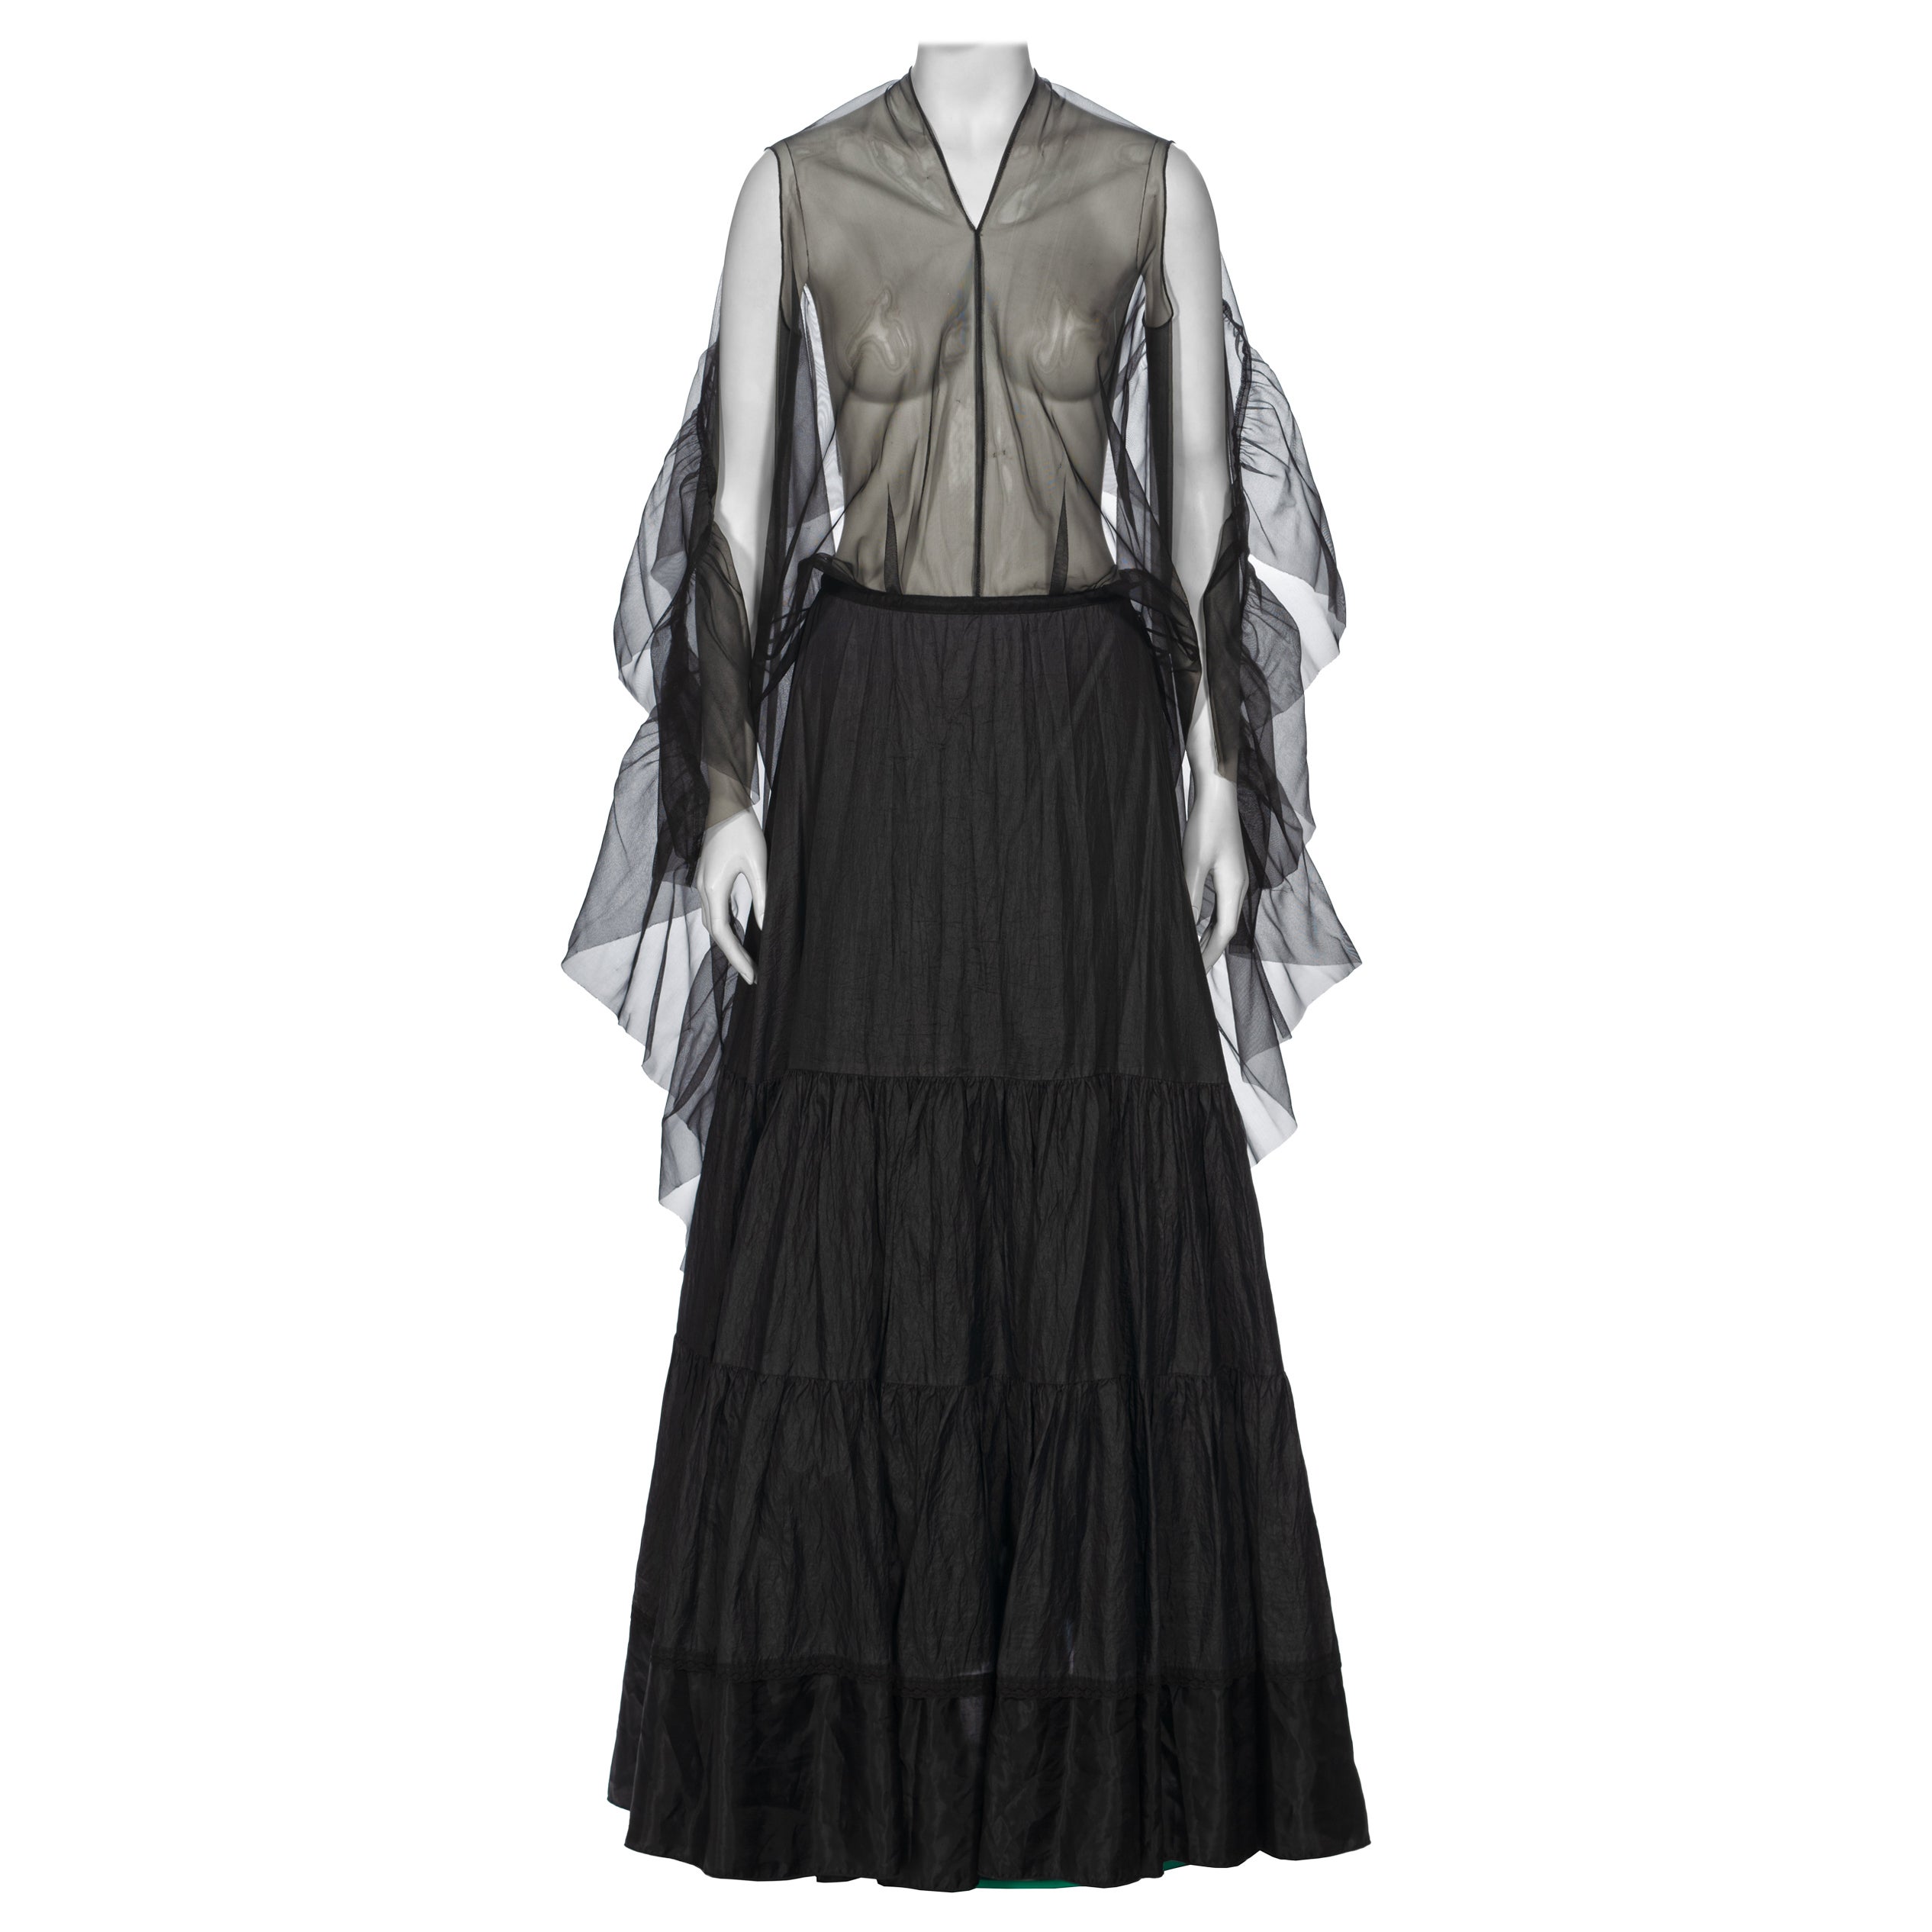 Martin Margiela Artisanal Evening Dress Made Out Of Vintage Petticoats, ss 2003 For Sale